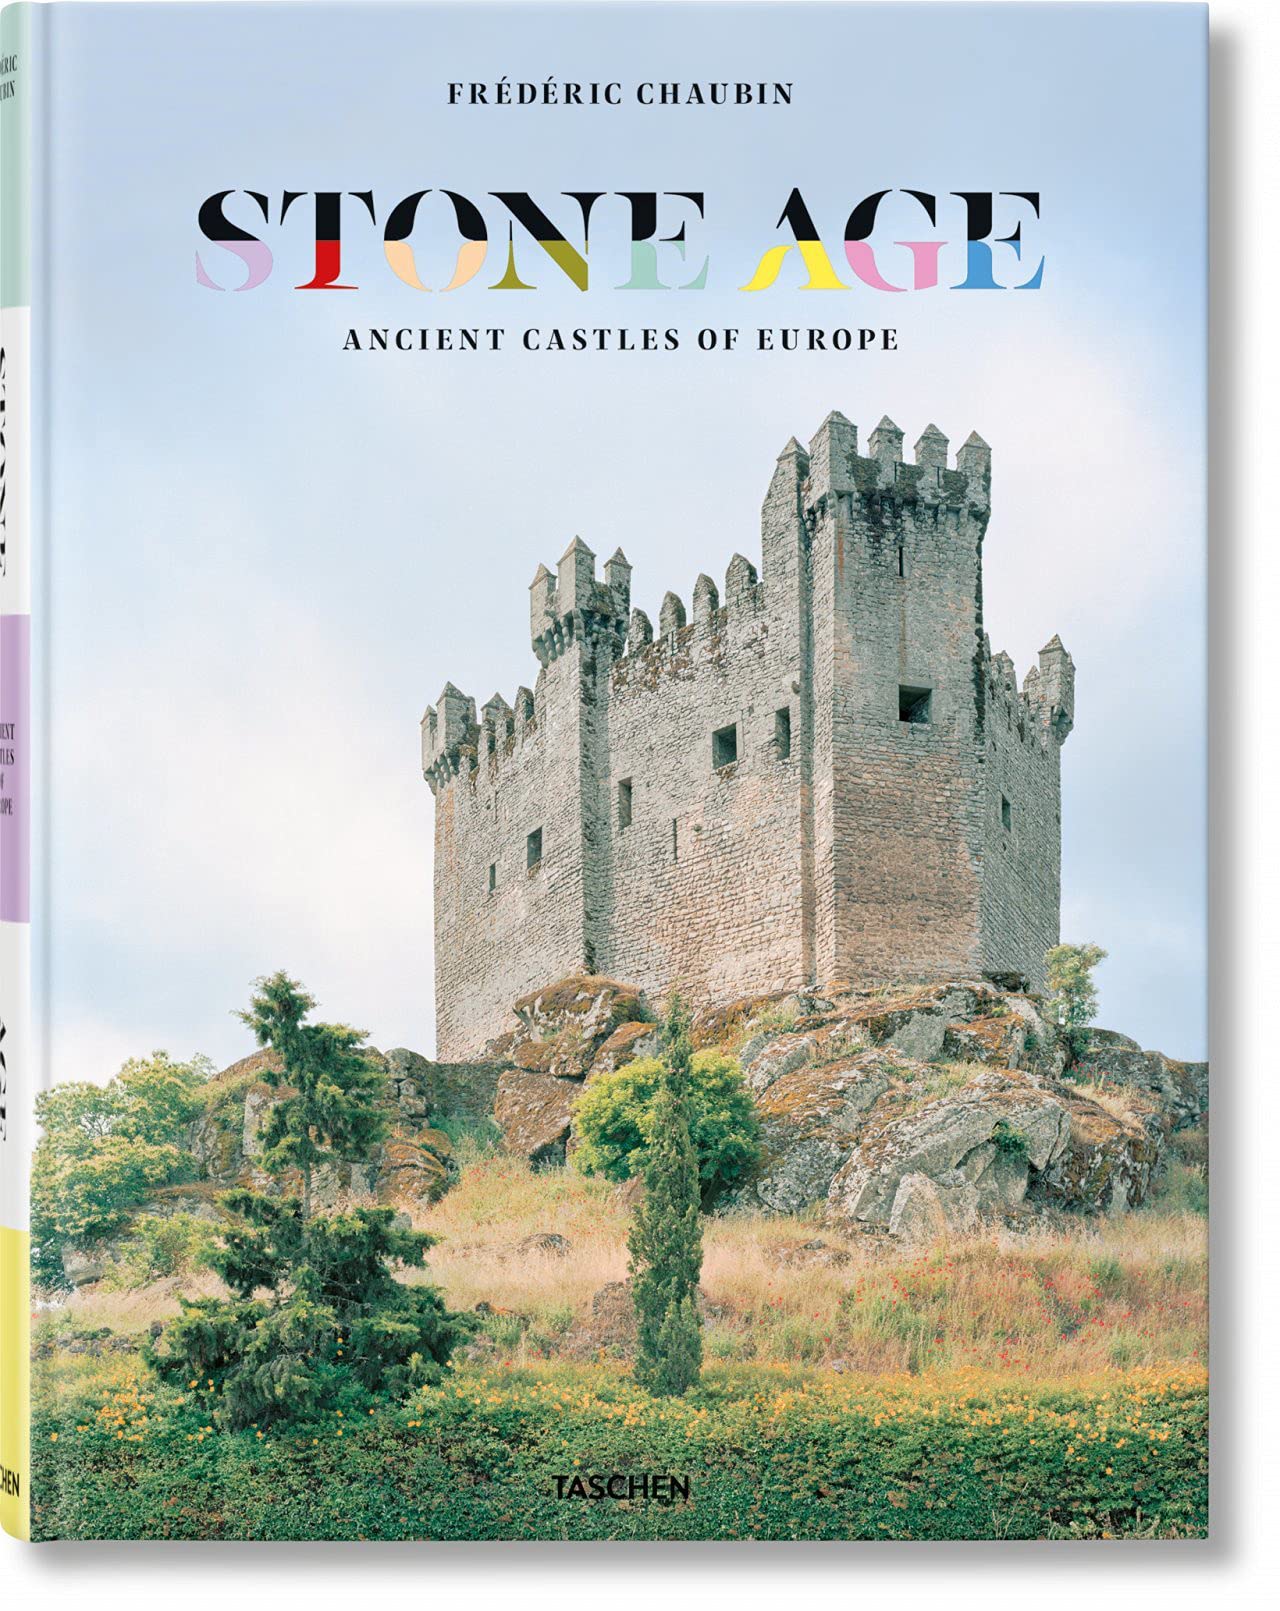 Stone Age. Ancient Castles of Europe. Frederic Chaubin.